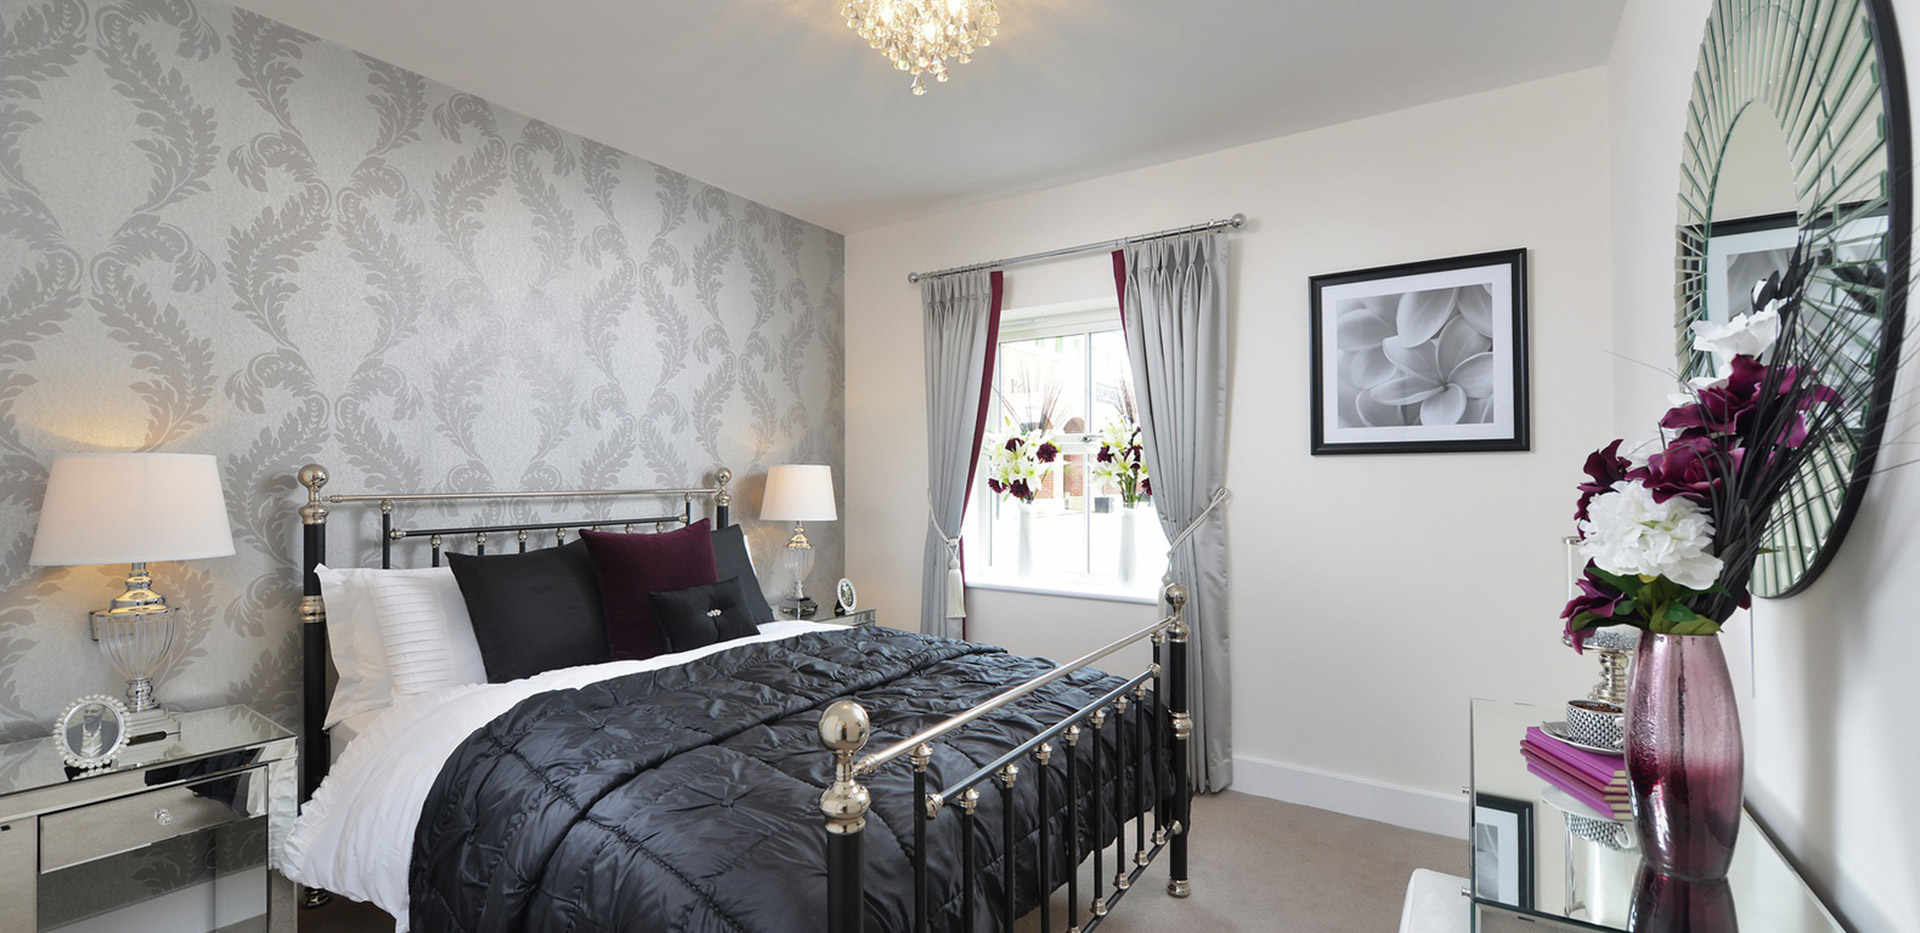 Berkeley, The Waterside at Royal Worcester, Previous Showhome, Master Bedroom, Interior